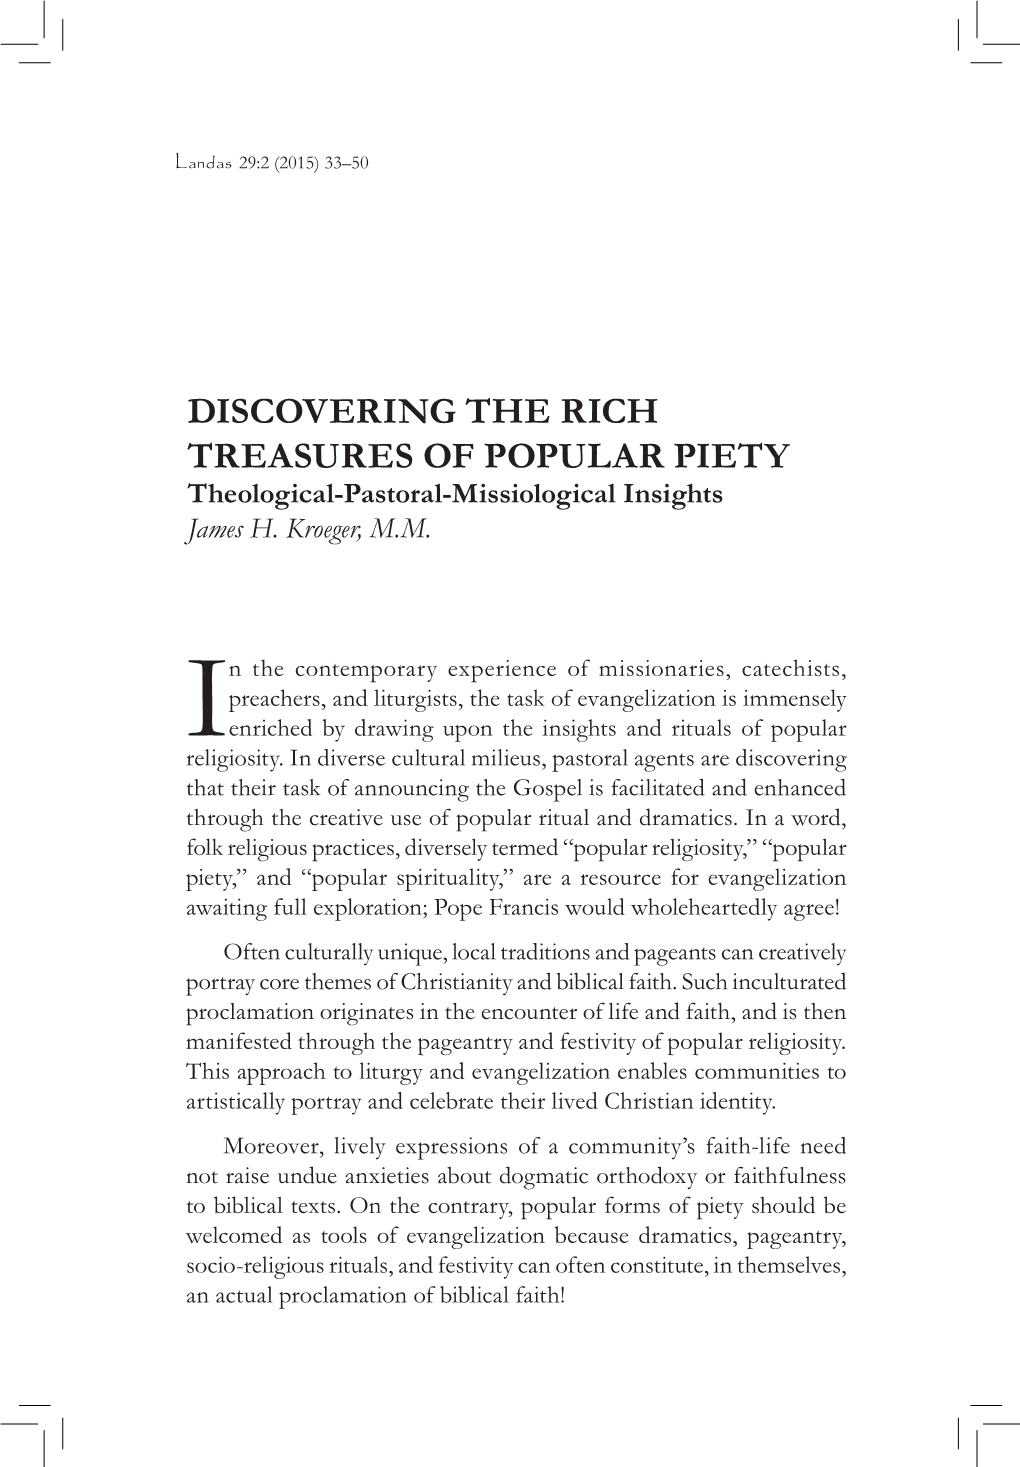 DISCOVERING the RICH TREASURES of POPULAR PIETY Theological-Pastoral-Missiological Insights James H